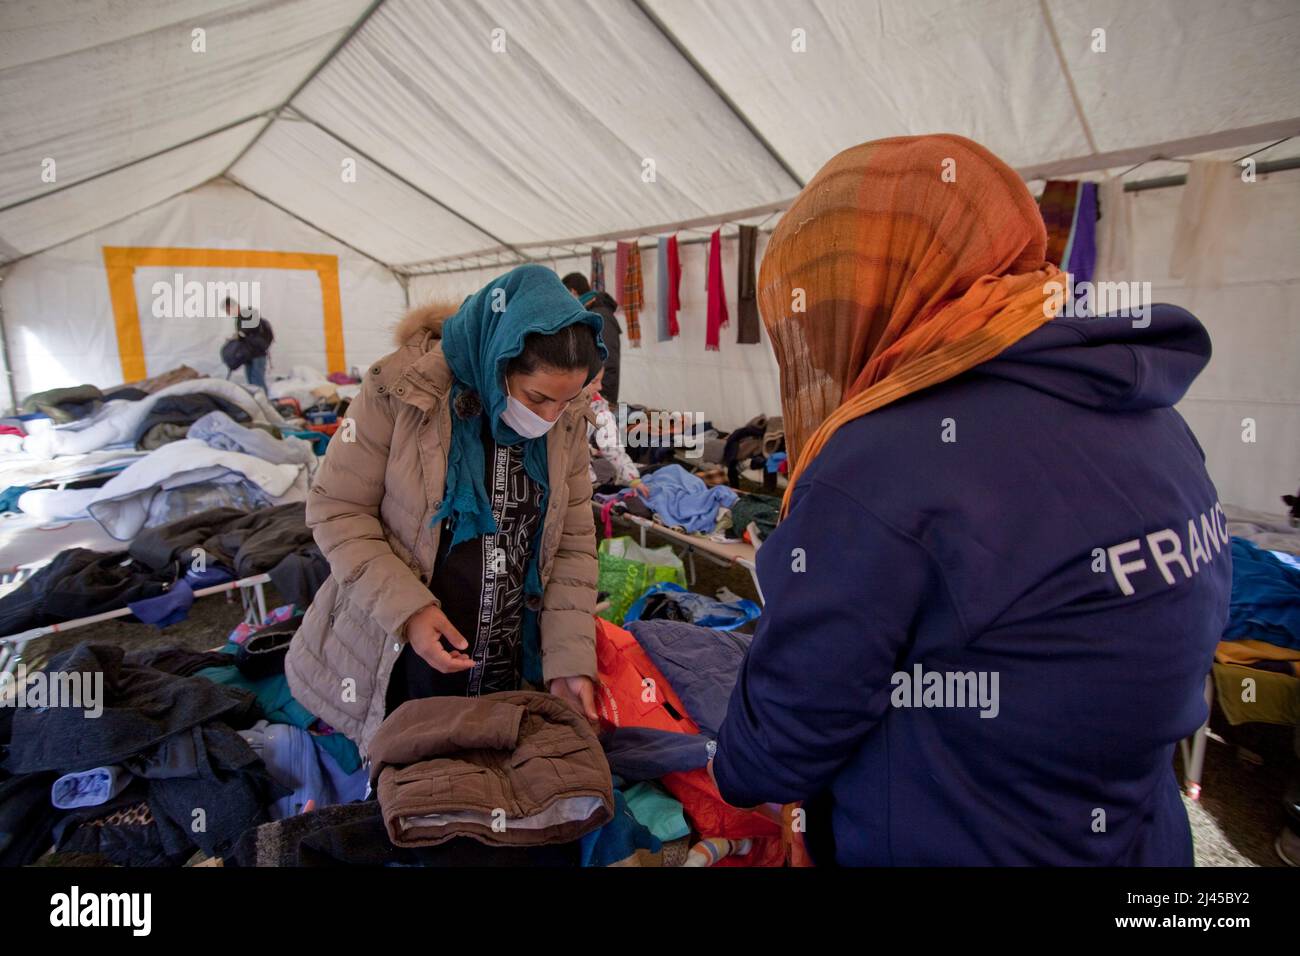 Briancon (French Alps, south-eastern France), November 5, 2021: two women looking for clothes for their children in a pile of clothes given by inhabit Stock Photo